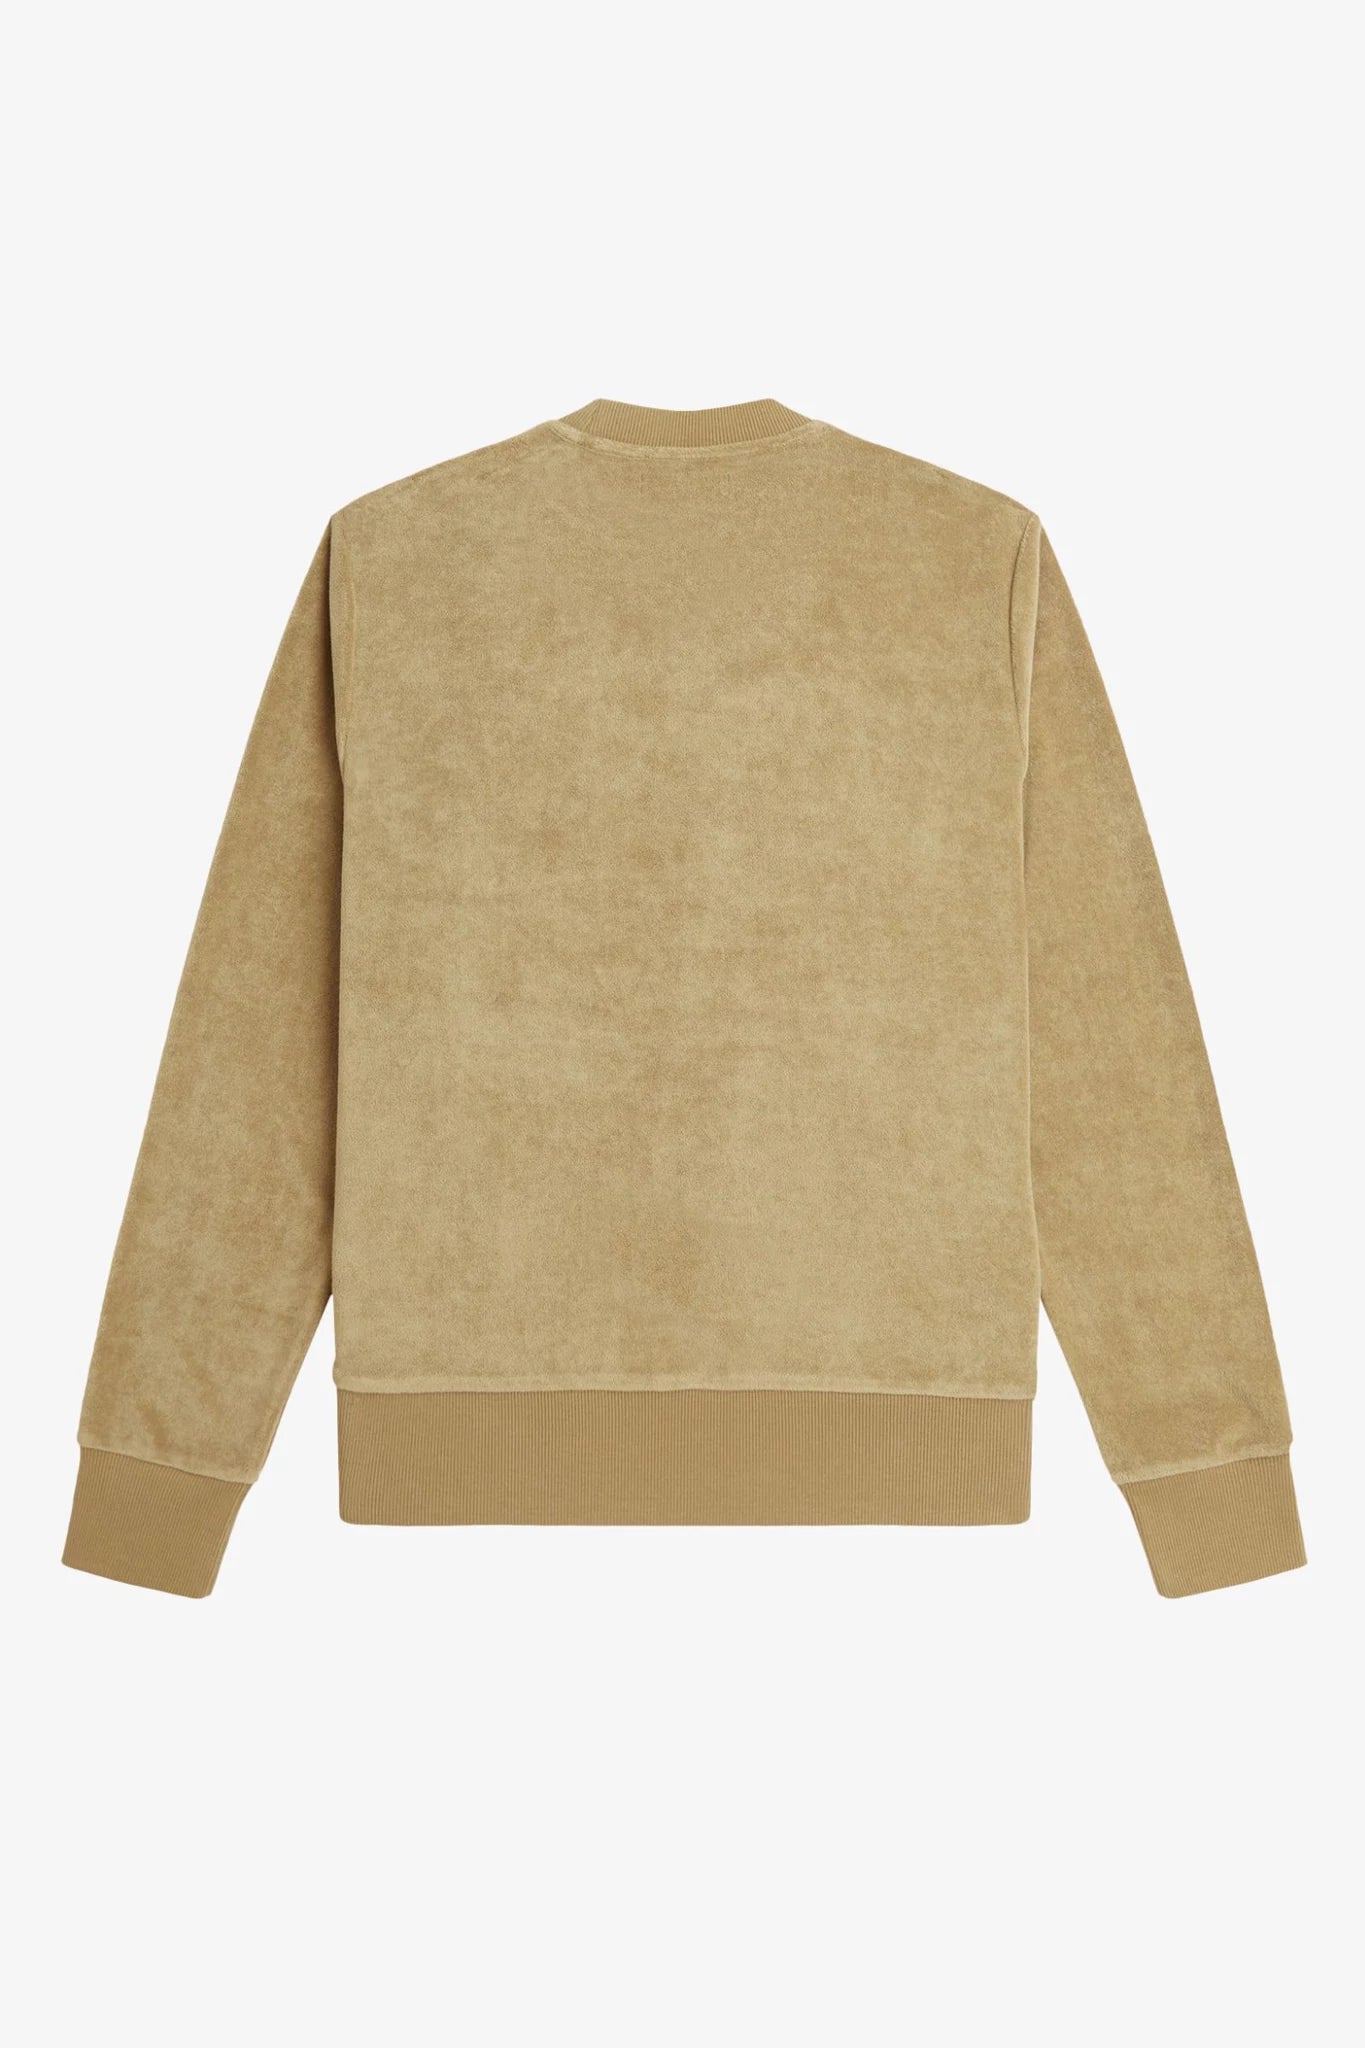 Towelling Crew Neck Sweatshirt Sweaters &amp; Knits Fred Perry   